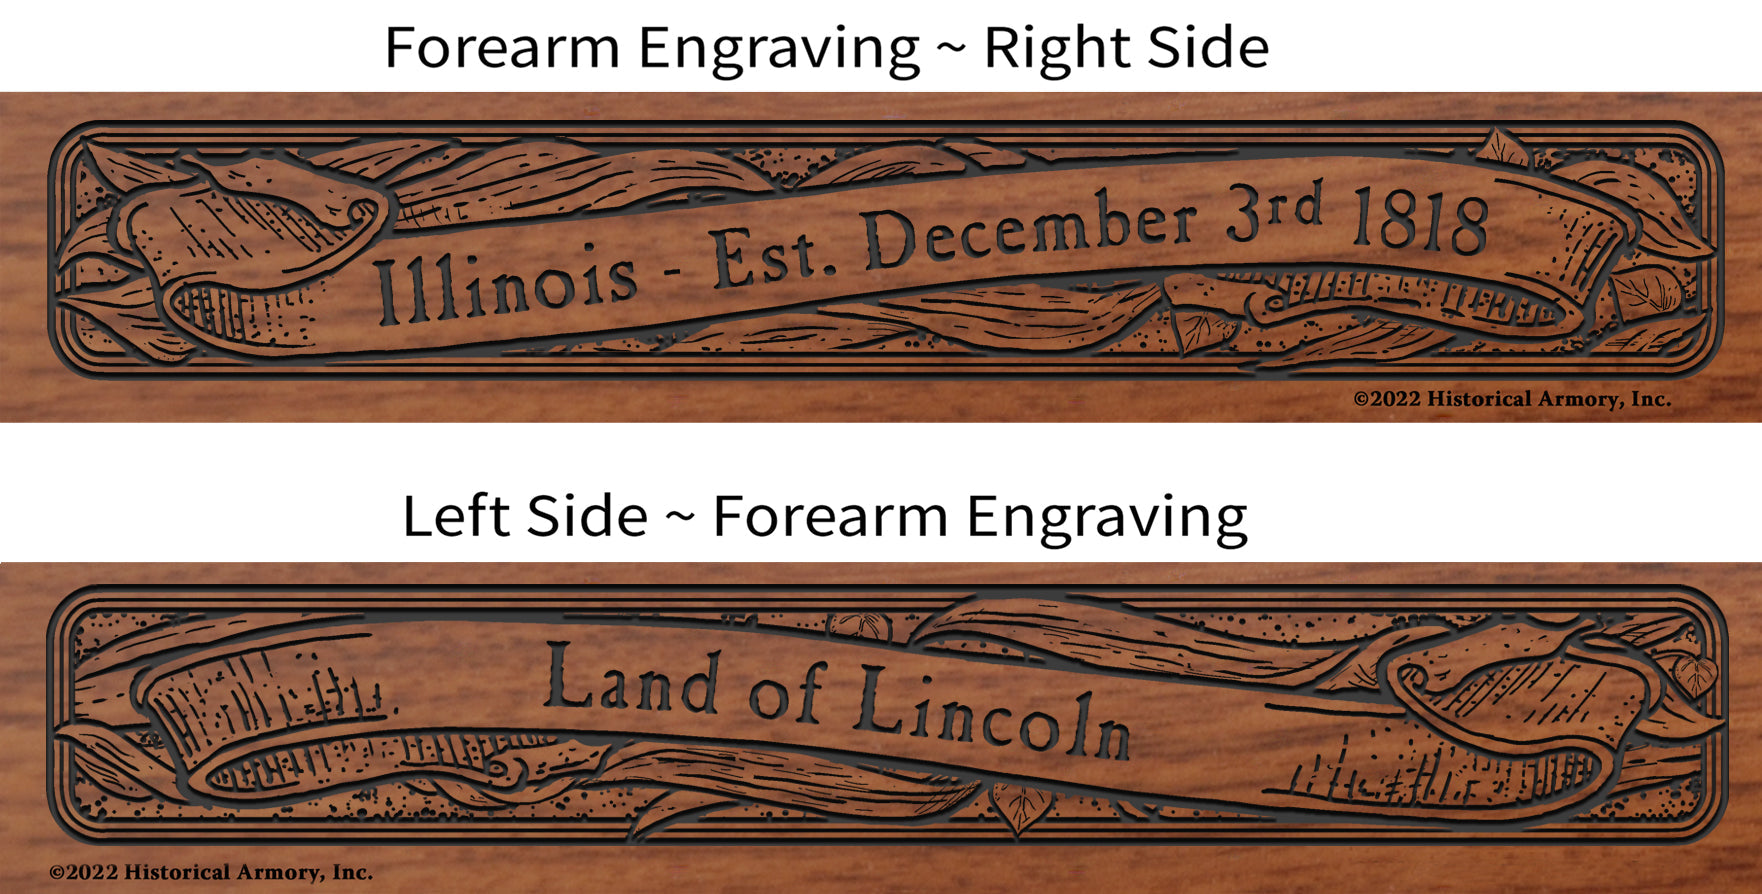 Illinois Agricultural Heritage Engraved Rifle Forearm